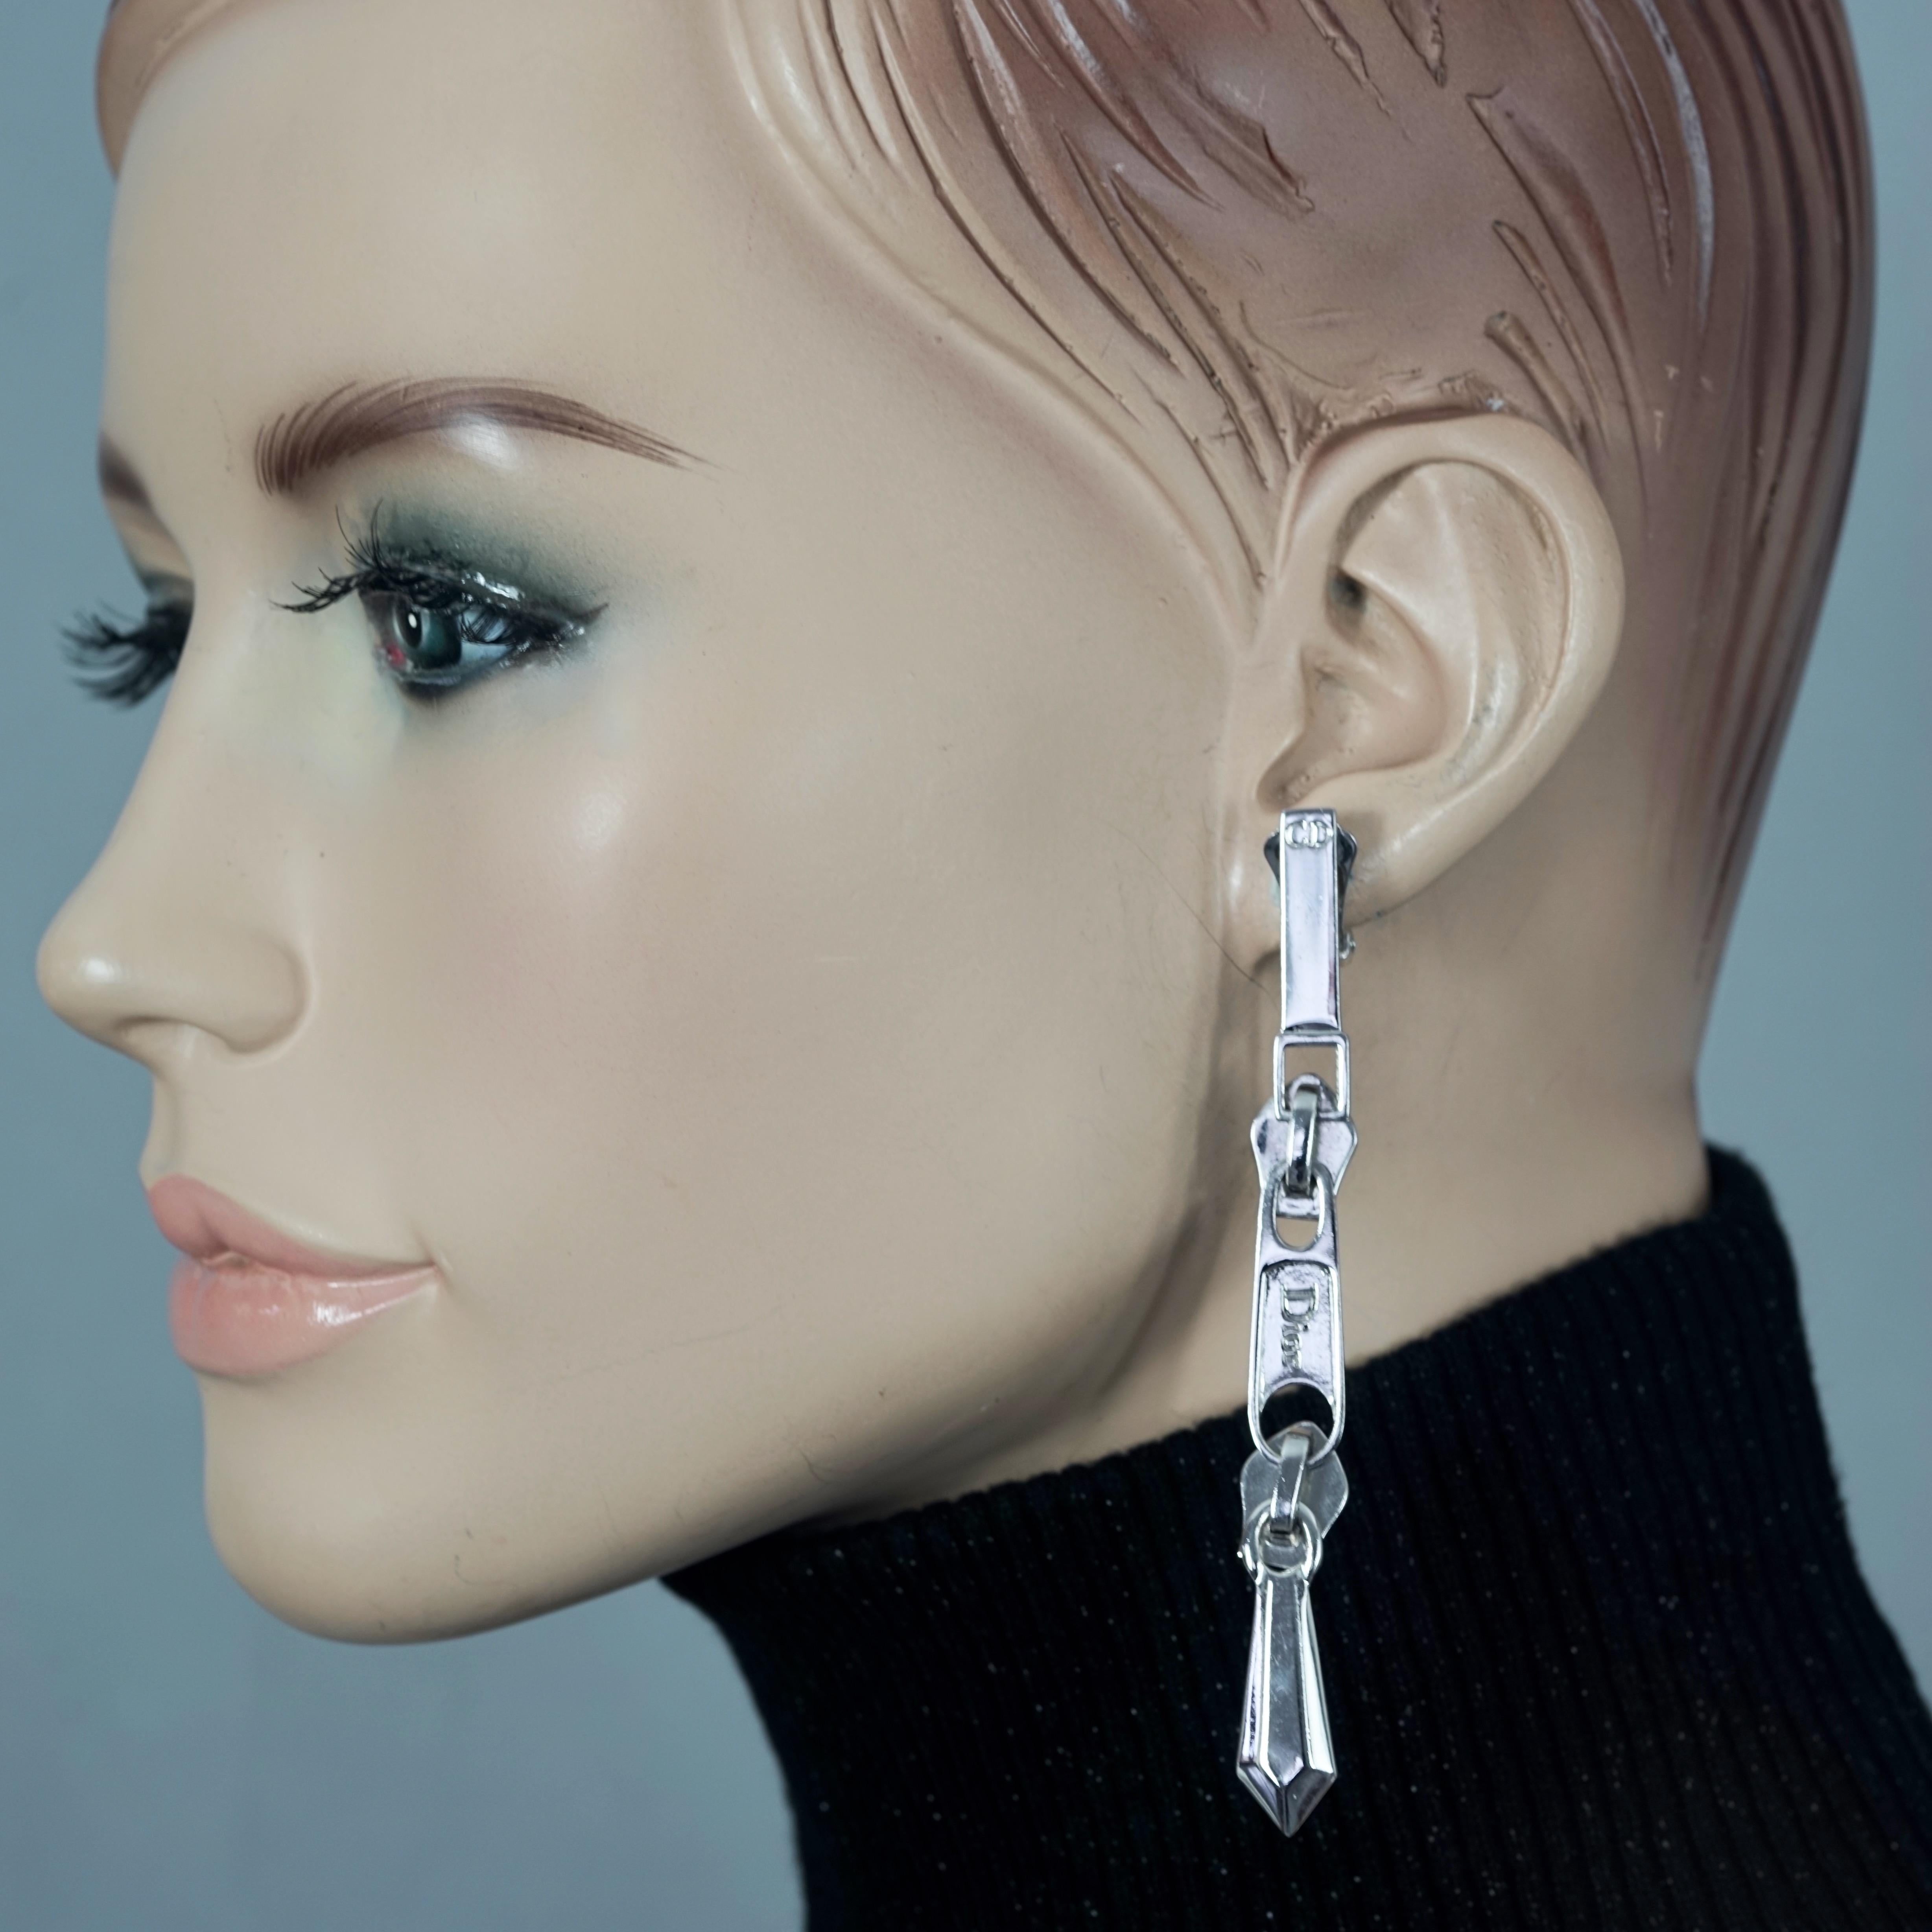 Vintage CHRISTIAN DIOR Logo Zipper Pull Dangling Earrings

Measurements:
Height: 3.62 inches (9.2 cm)
Width: 0.39 inch (1 cm)
Weight per Earring: 10 grams

Features:
- 100% Authentic CHRISTIAN DIOR.
- Novelty zipper pull dangling earrings with